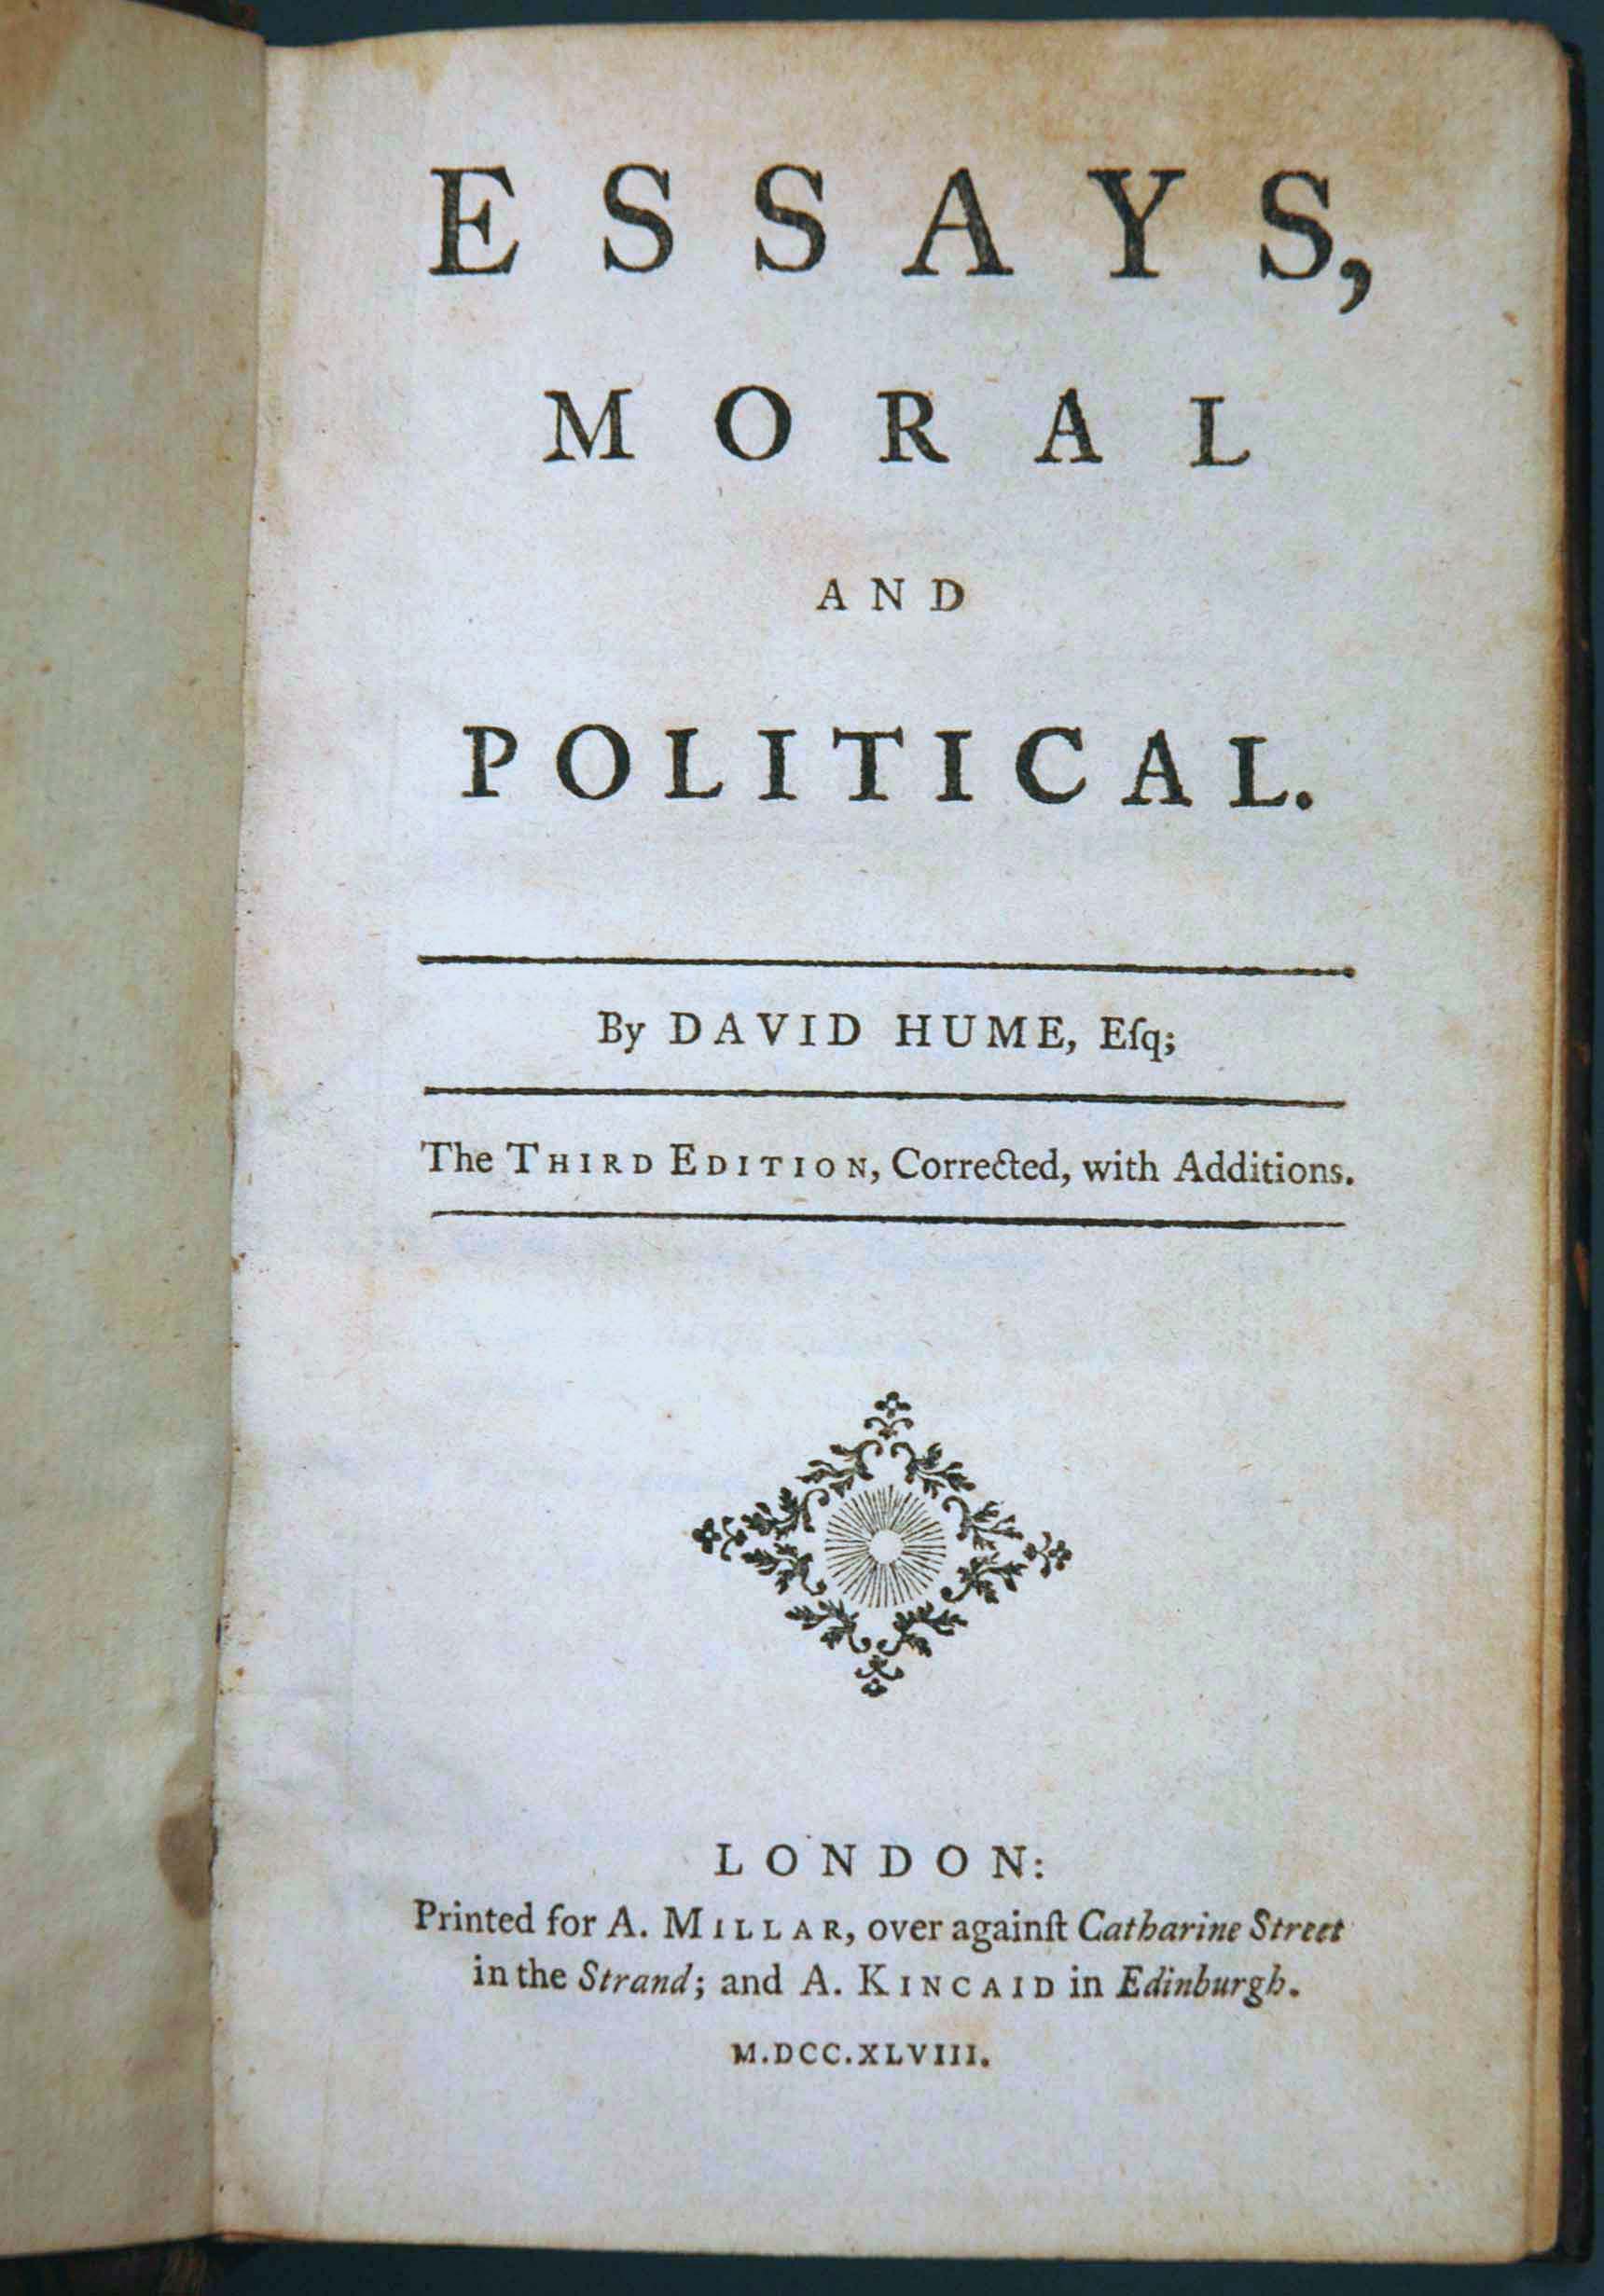 Racism David Hume's View , Sample of Essays